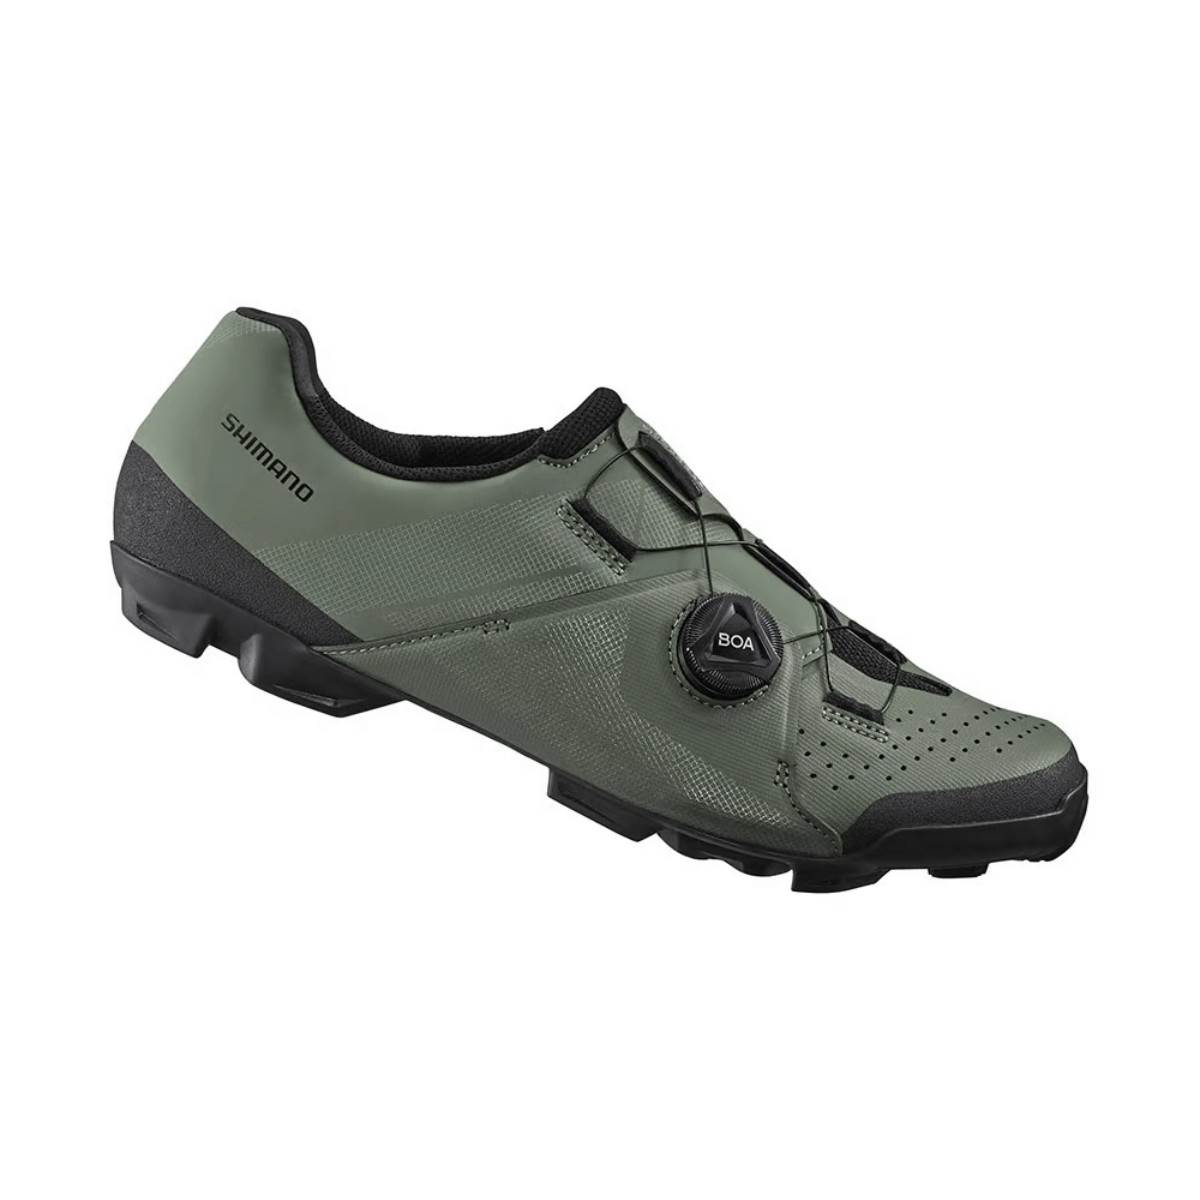 Shimano XC300 Shoes Olive Green, Size 41 - EUR